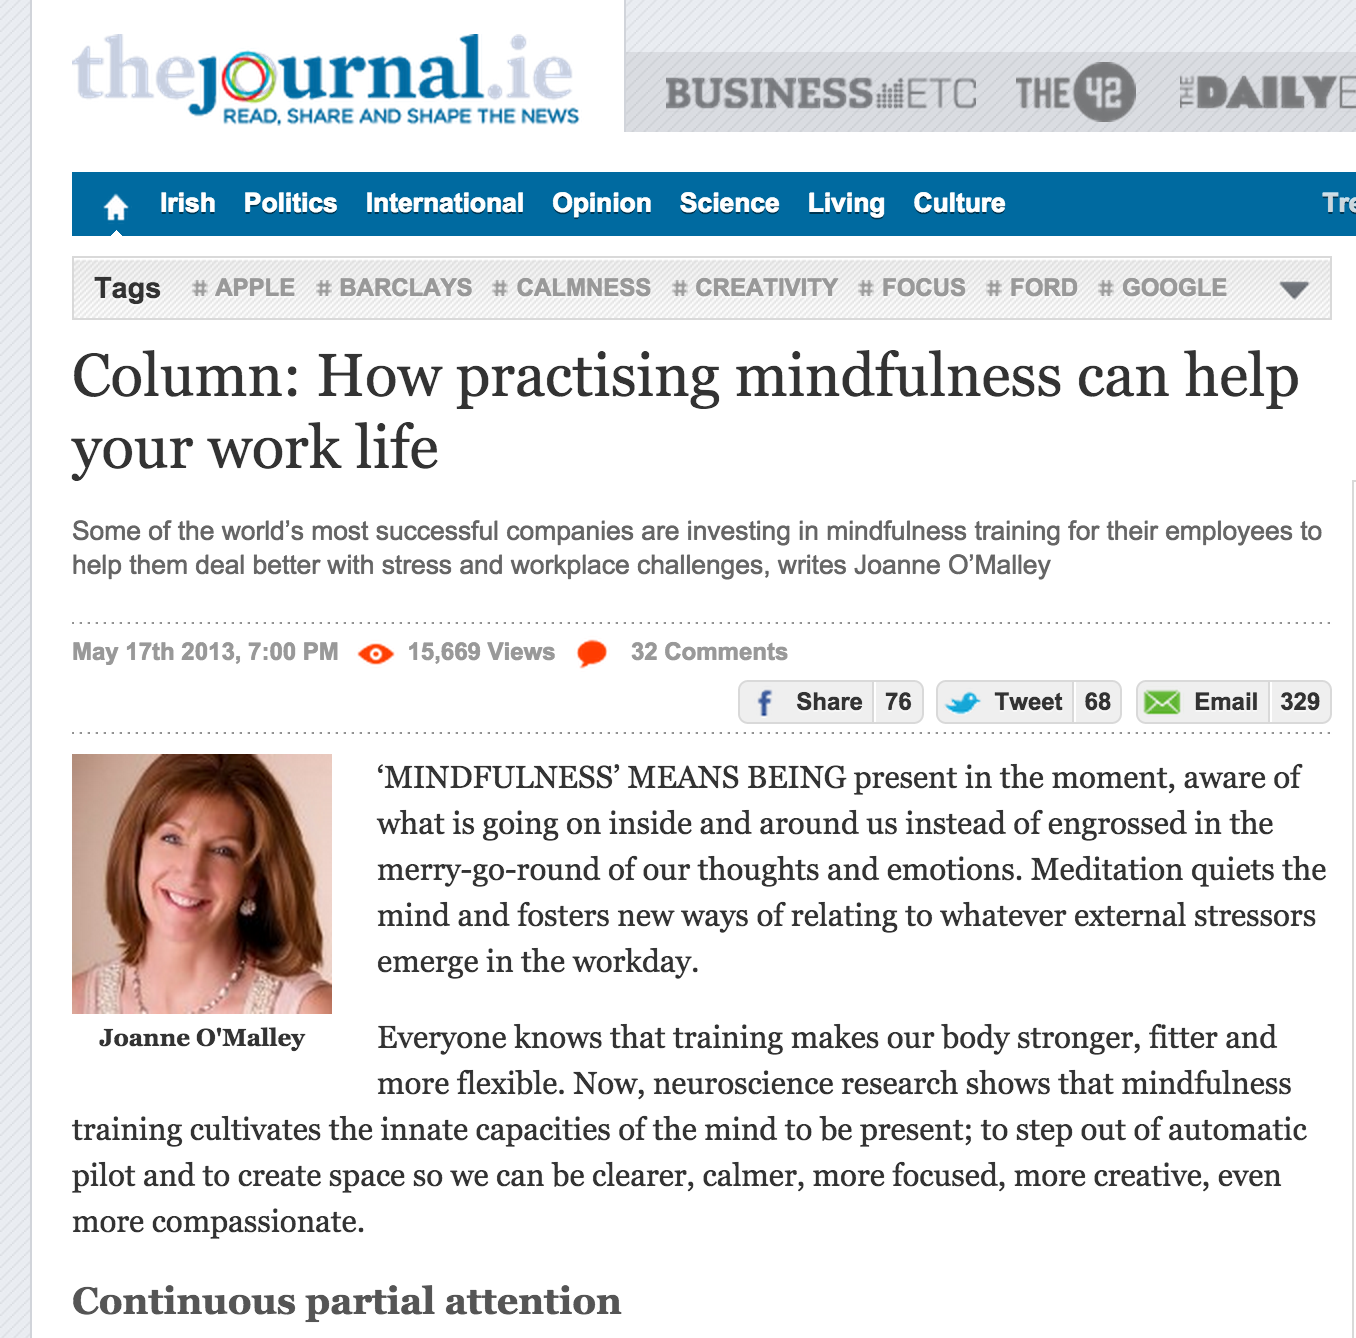 How practising mindfulness helps work life